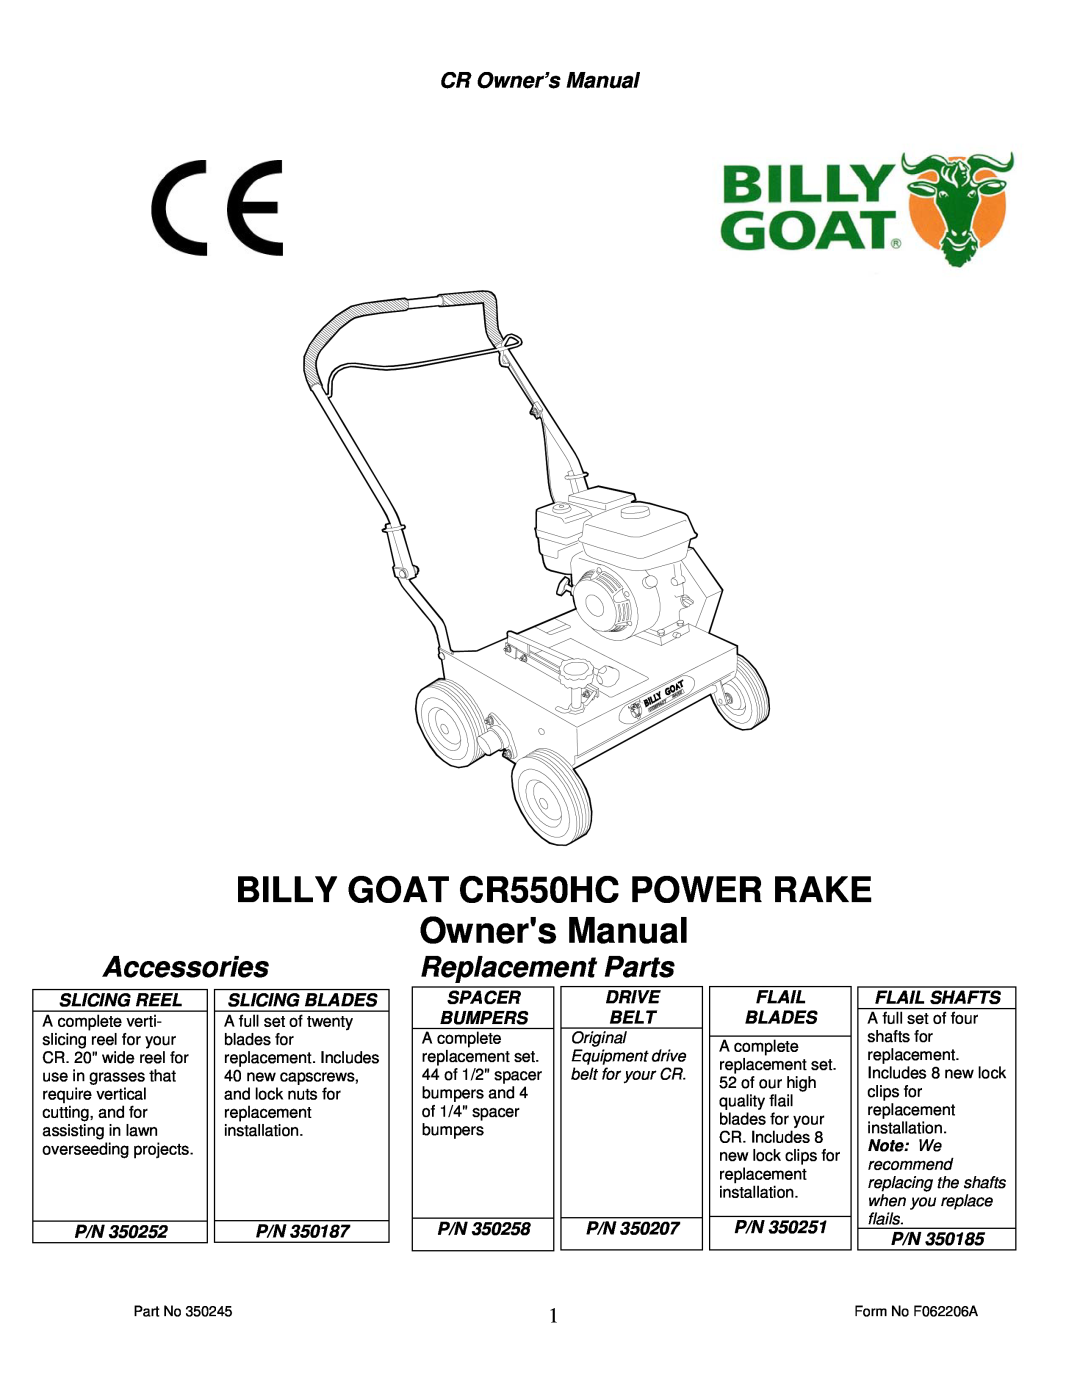 Billy Goat CR550HC owner manual Accessories, Replacement Parts, Slicing Reel, Slicing Blades, Spacer Bumpers, Drive Belt 